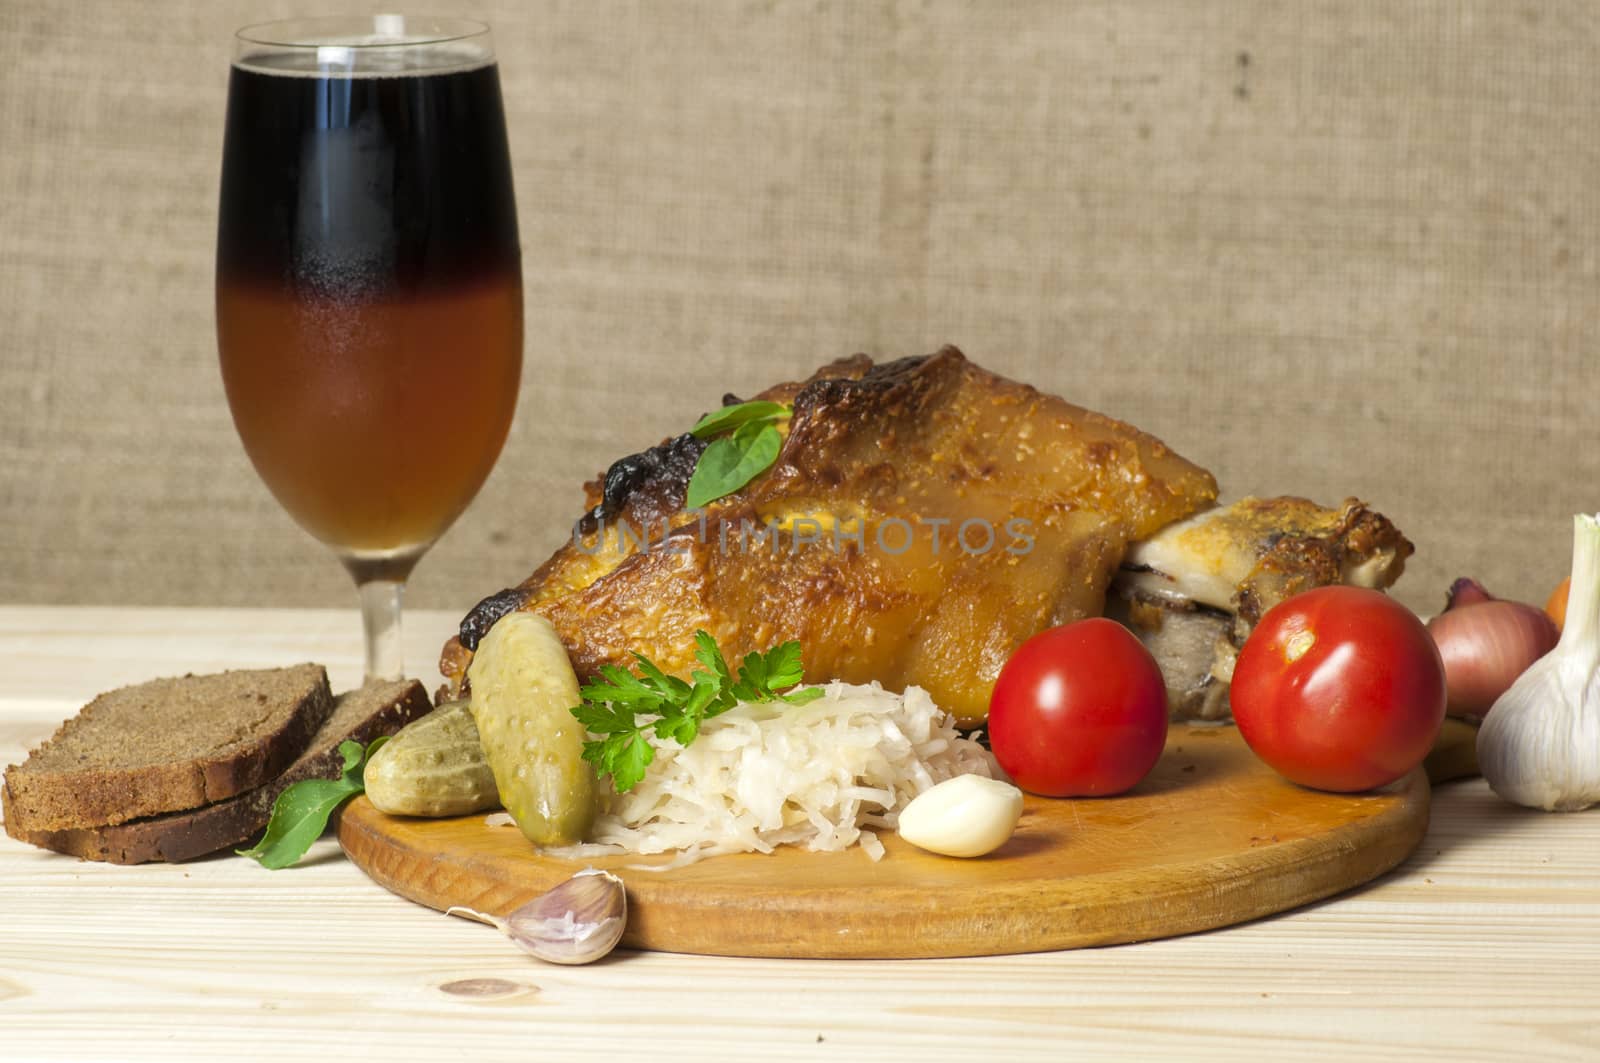 Roasted pork leg served with sauerkraut and sliced beer by dred